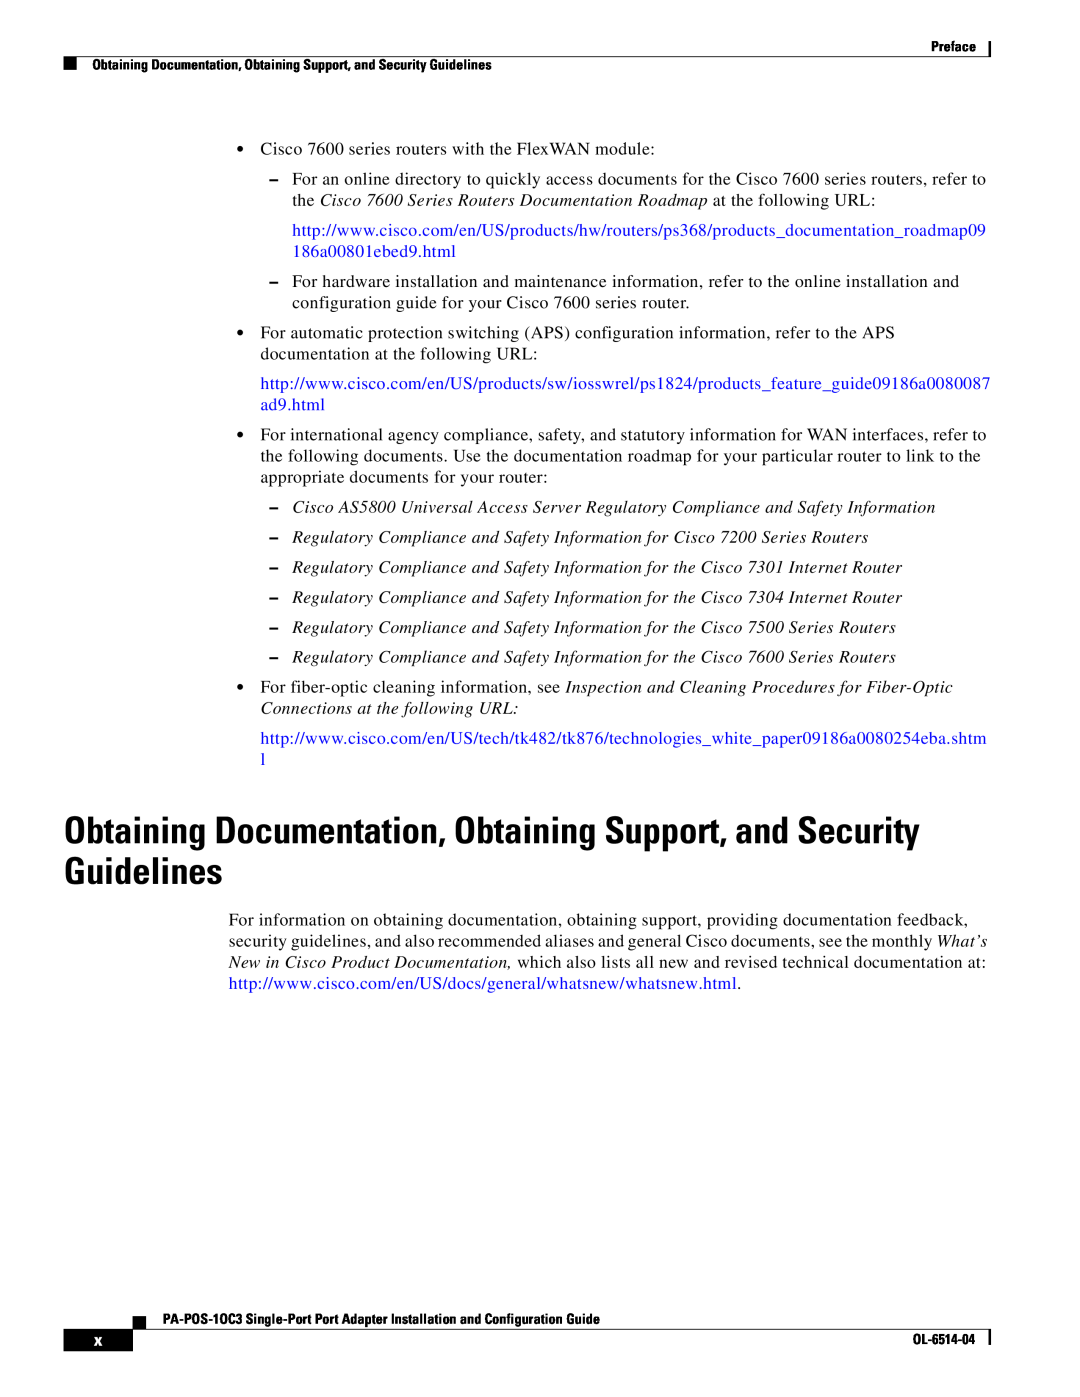 Cisco Systems PA-POS-2OC3, PA-POS-1OC3 manual Obtaining Documentation, Obtaining Support, and Security Guidelines 